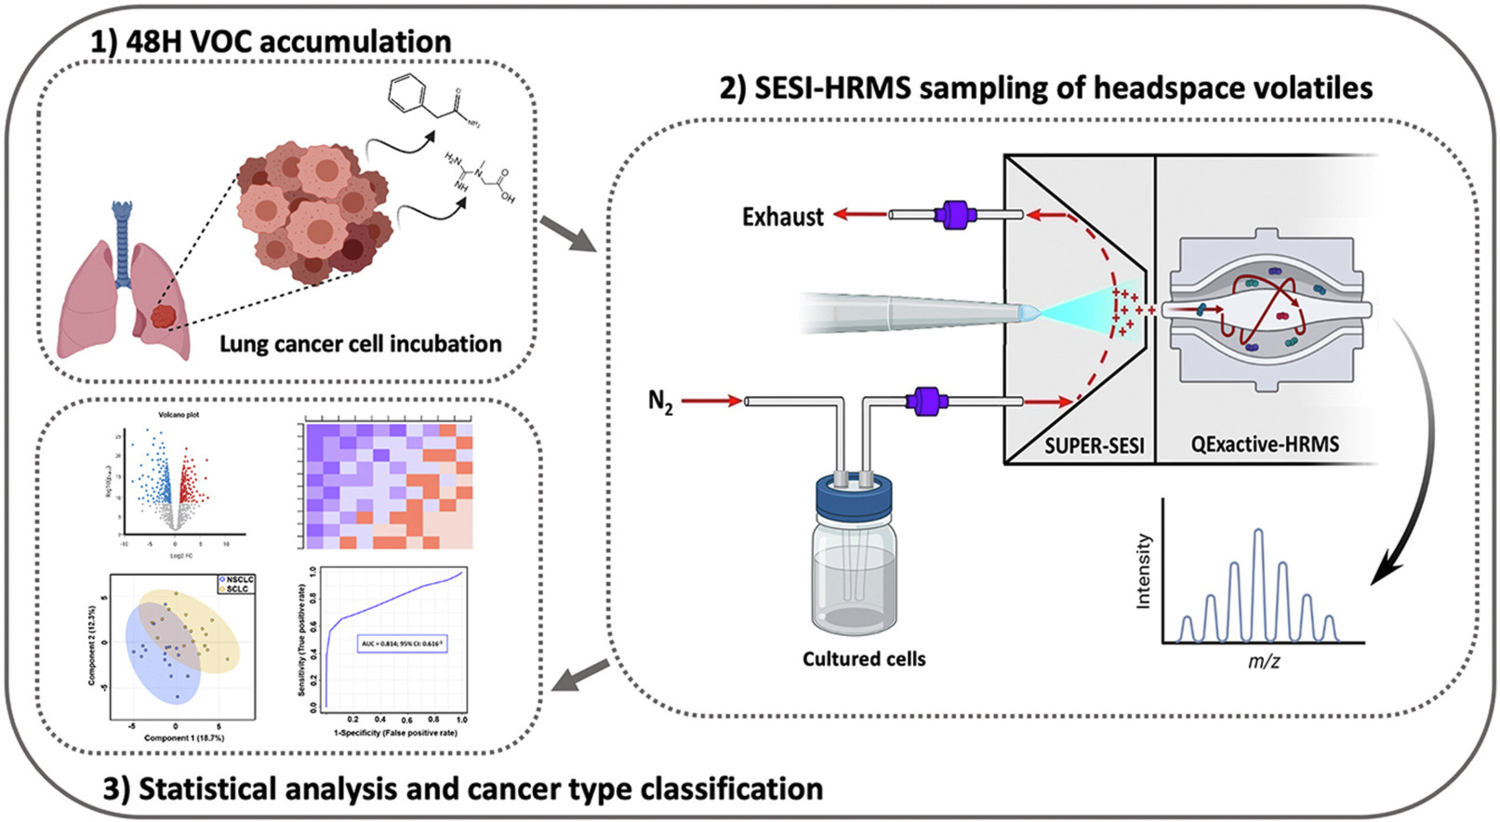 Secondary electrospray ionization-high resolution mass spectrometry  (SESI-HRMS) fingerprinting enabled treatment monitoring of pulmonary  carcinoma cells in real time — The nano-electrospray company